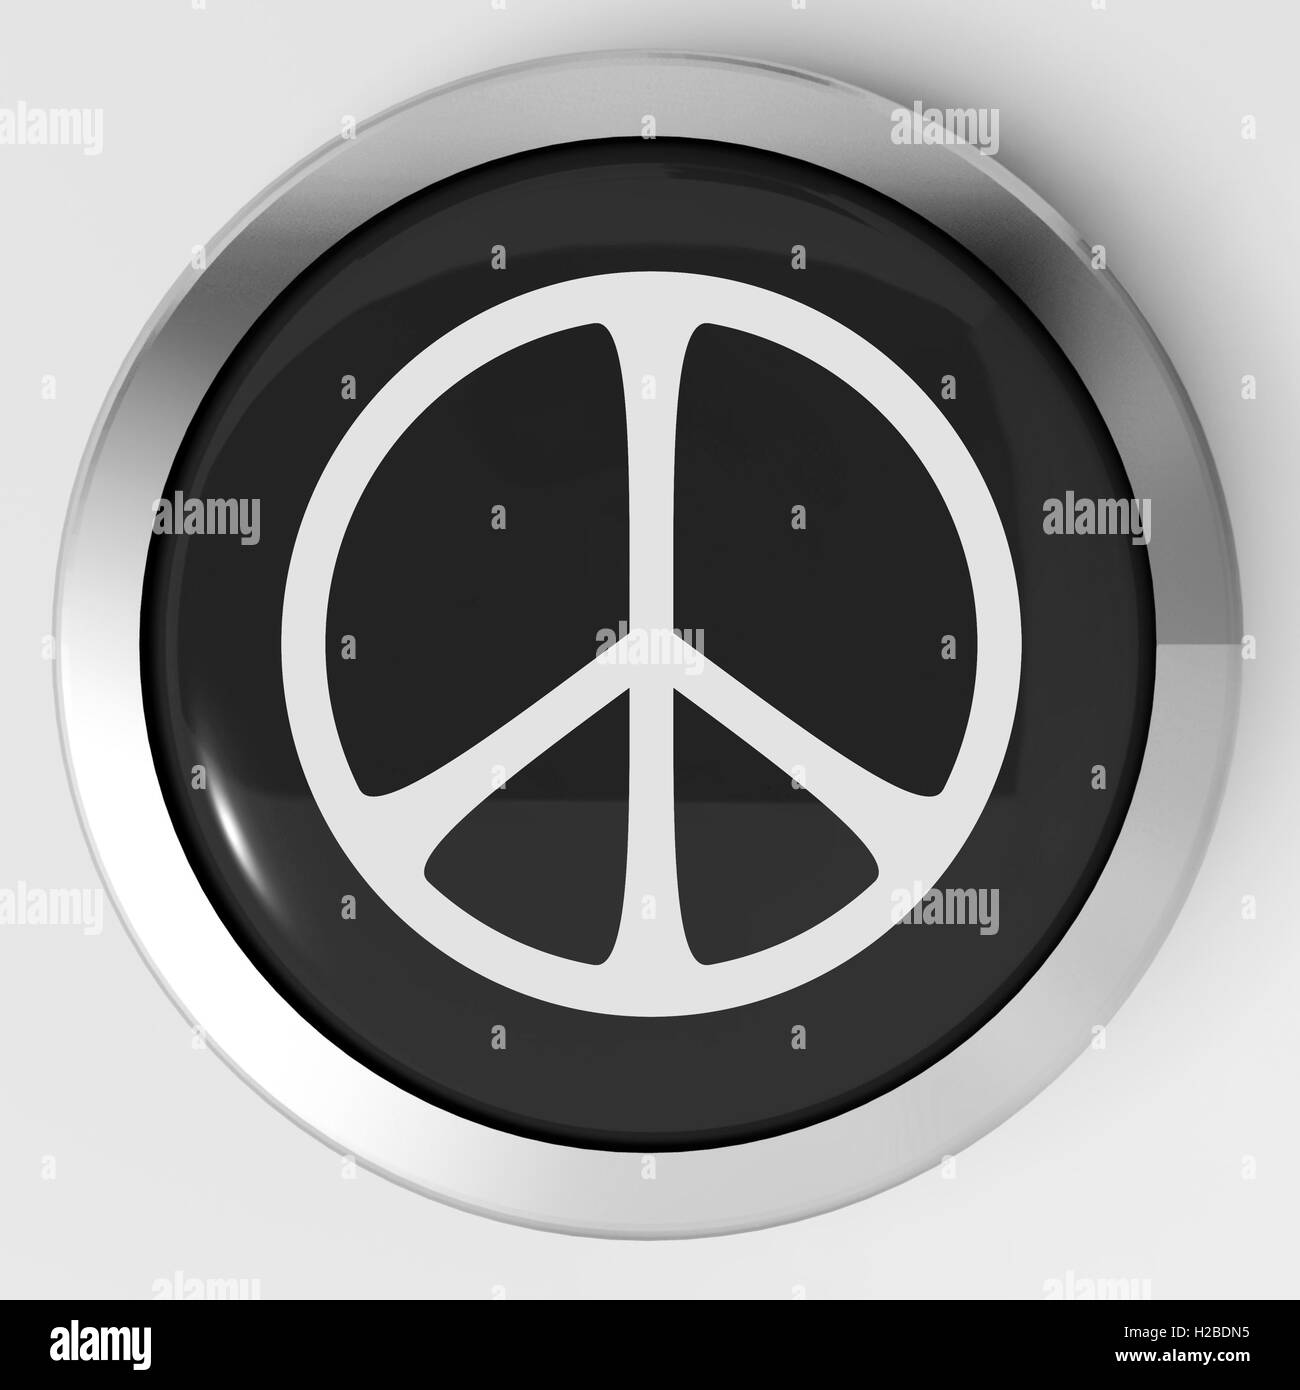 Peace Sign Button Shows Love Not War Stock Photo